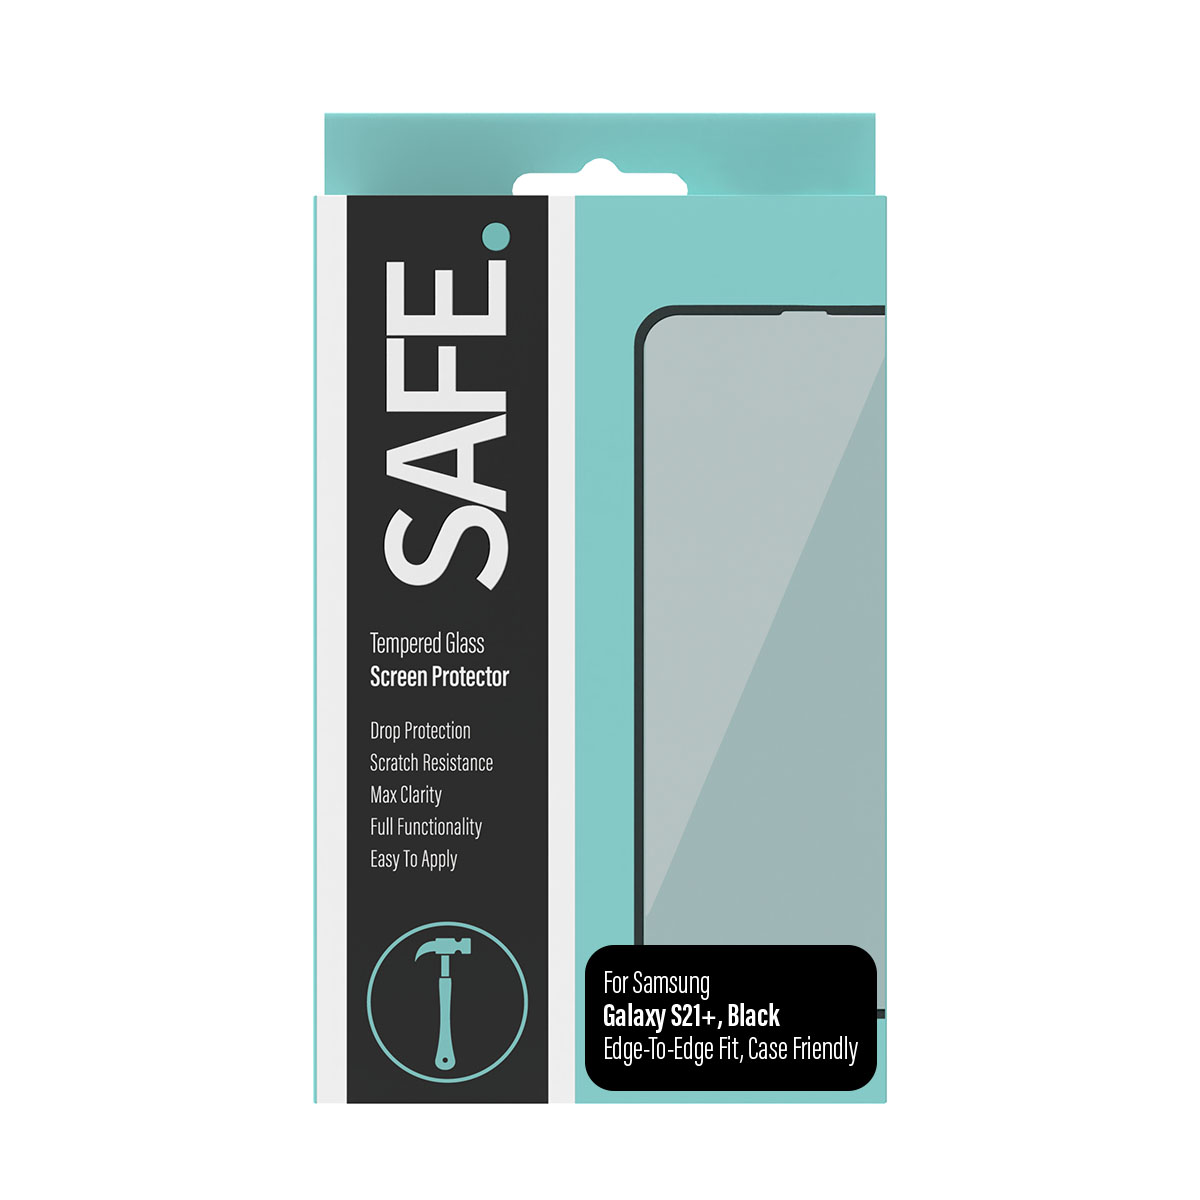 SAFE Samsung Galaxy S21+ - Screen Protector - Drop Protective, Scratch Resistance, Max Clarity